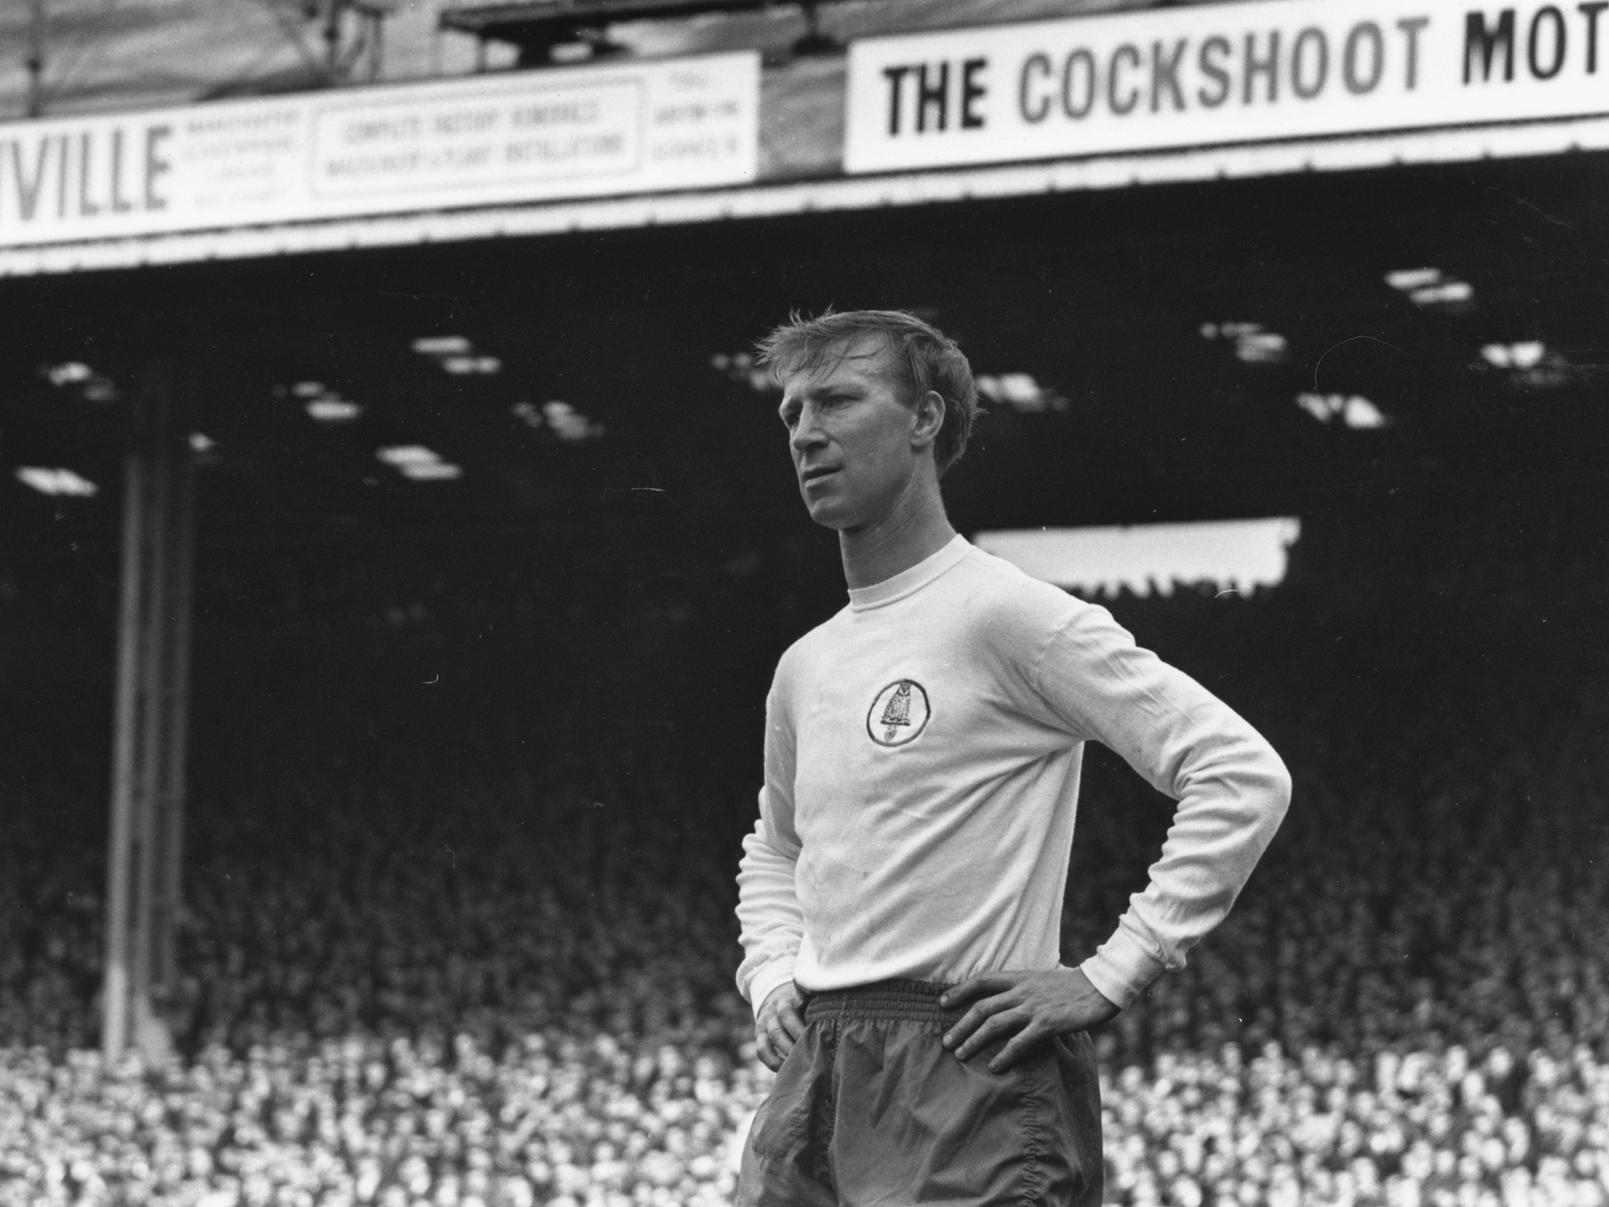 Spent his entire club career with Leeds United from 1950 to 1973 making 762 appearances for the Whites.